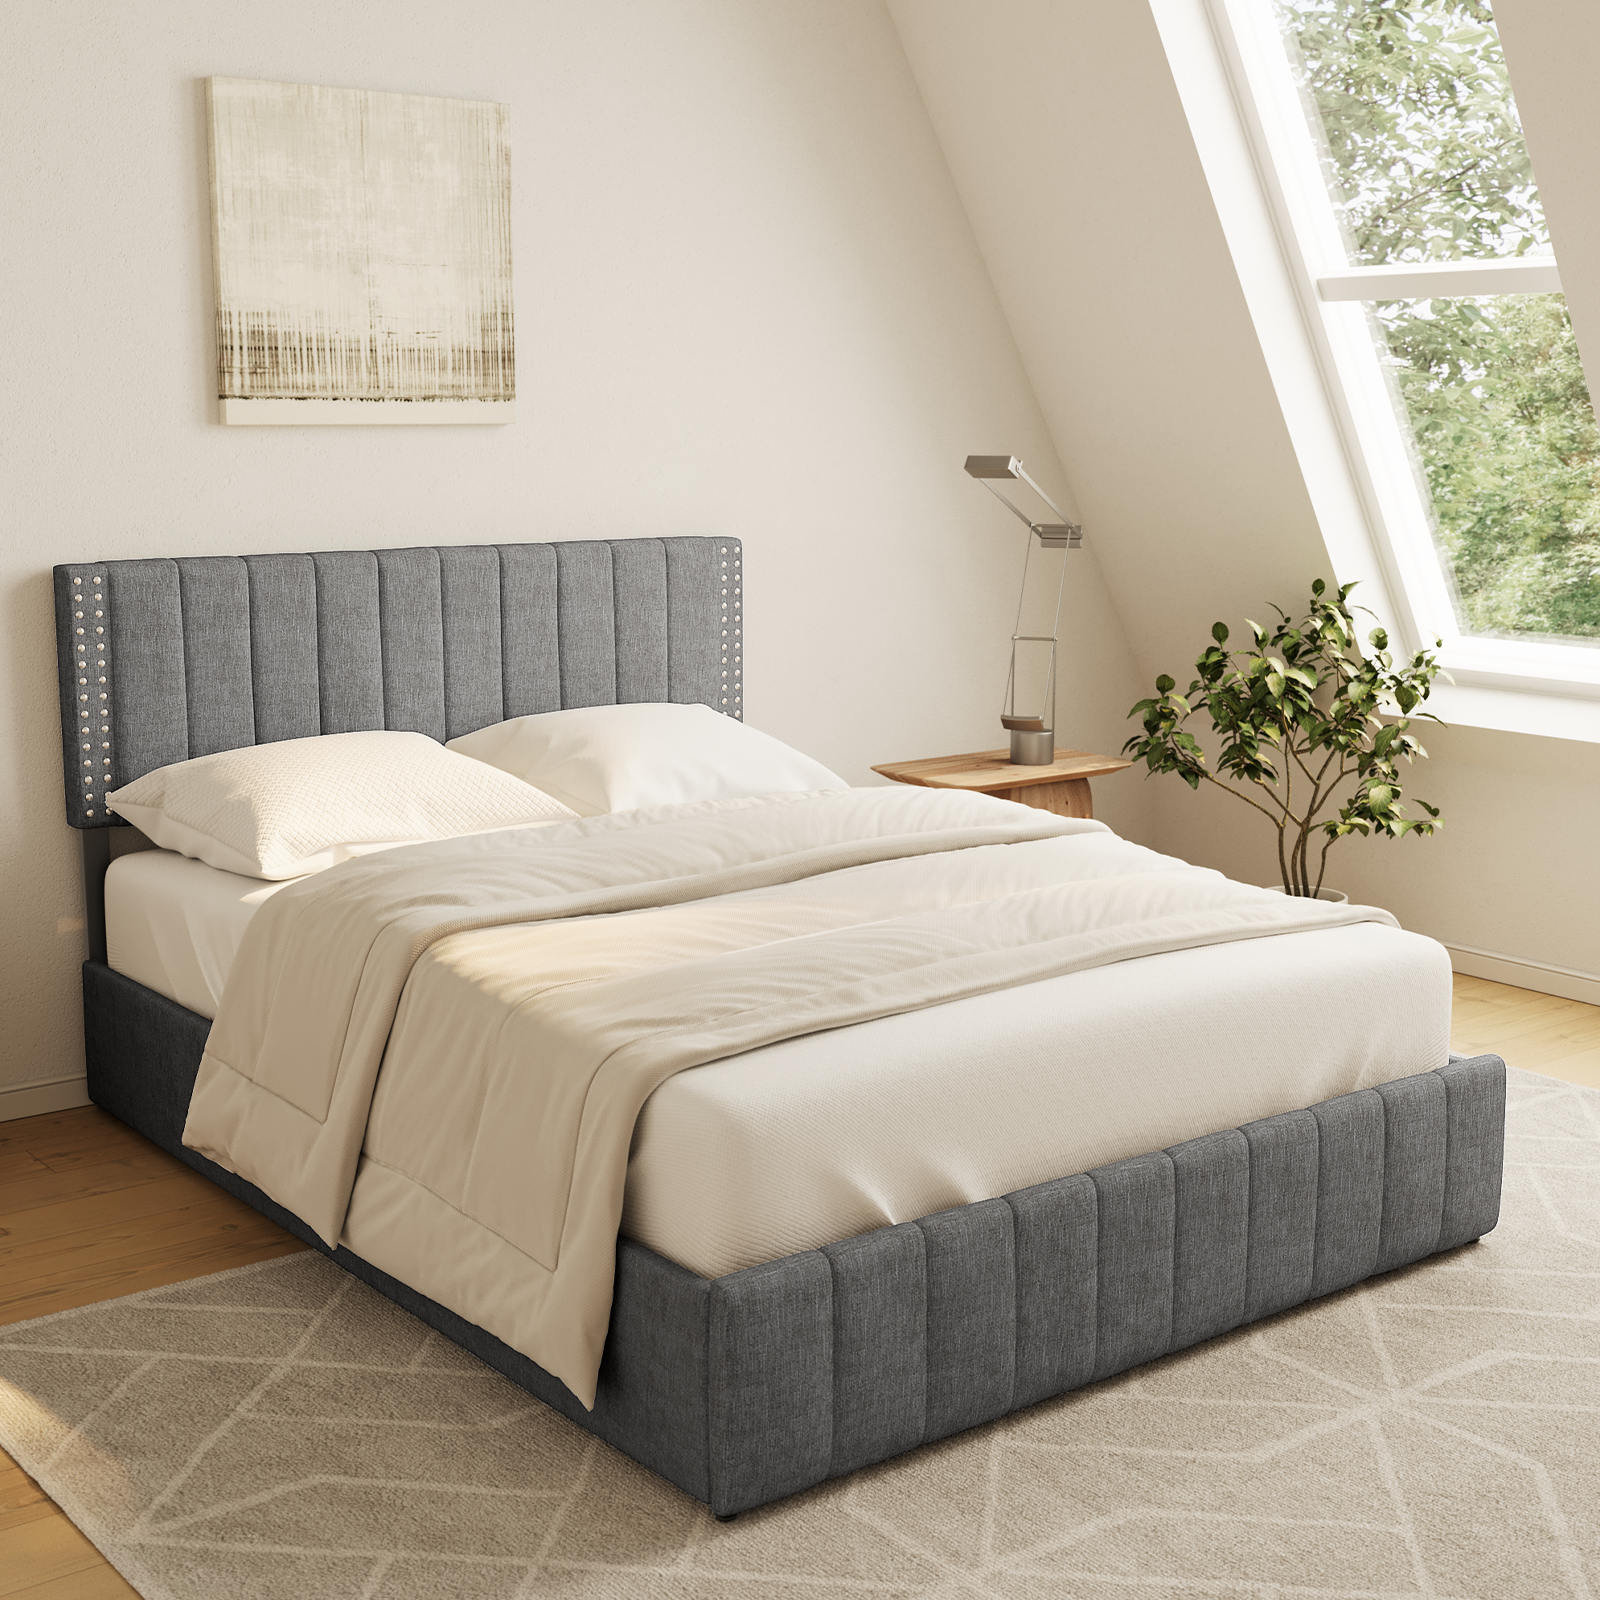 Bed Frame Queen with 4 Storage Drawers for Bedroom, Light Grey - image 5 of 10